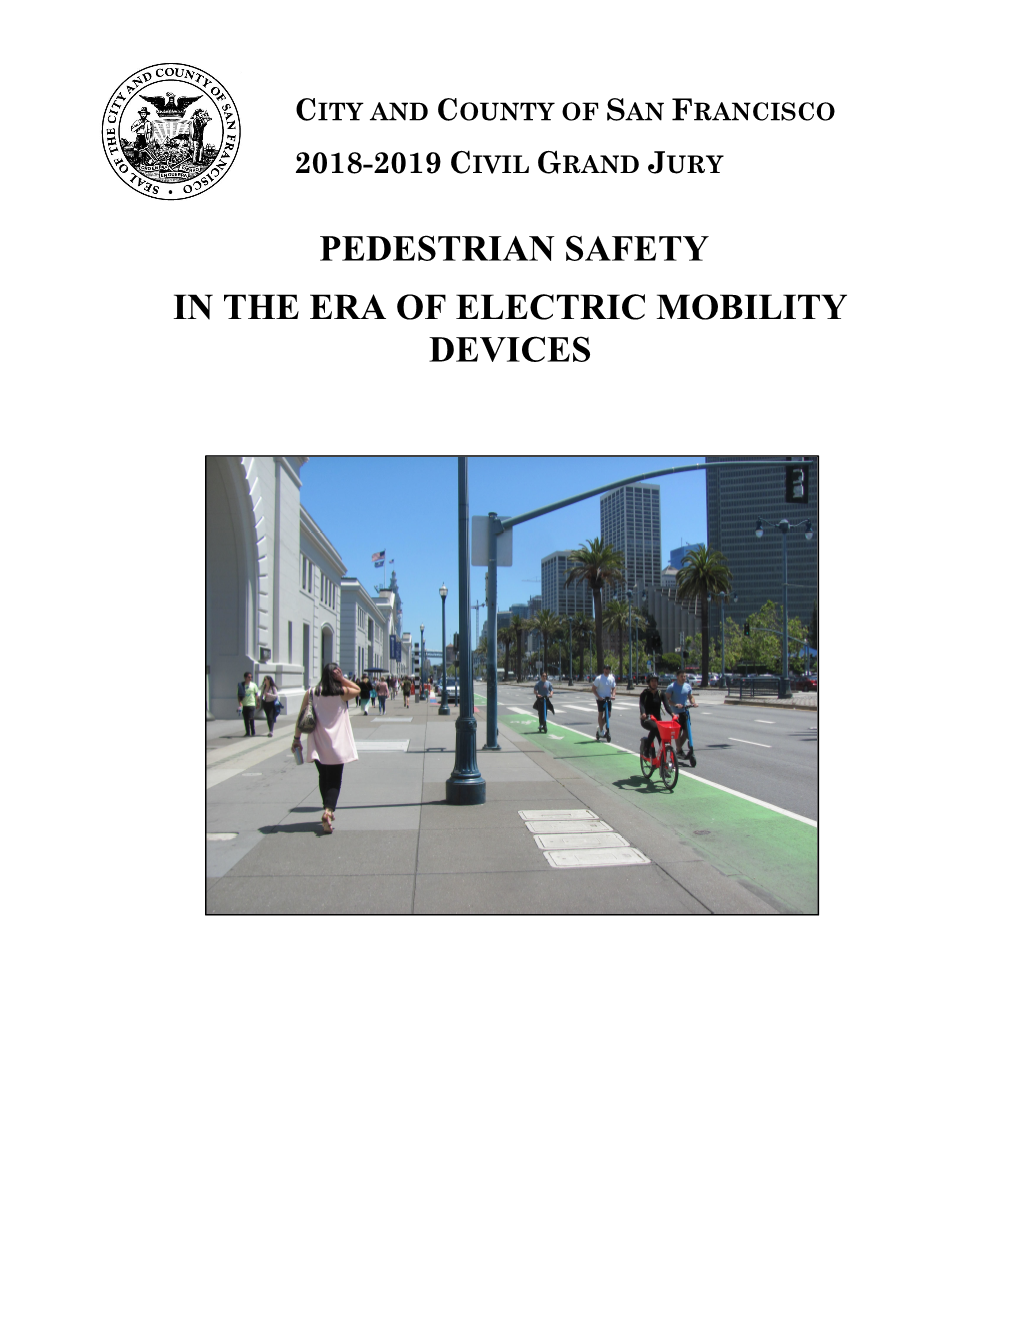 Pedestrian Safety in the Era of Electric Mobility Devices